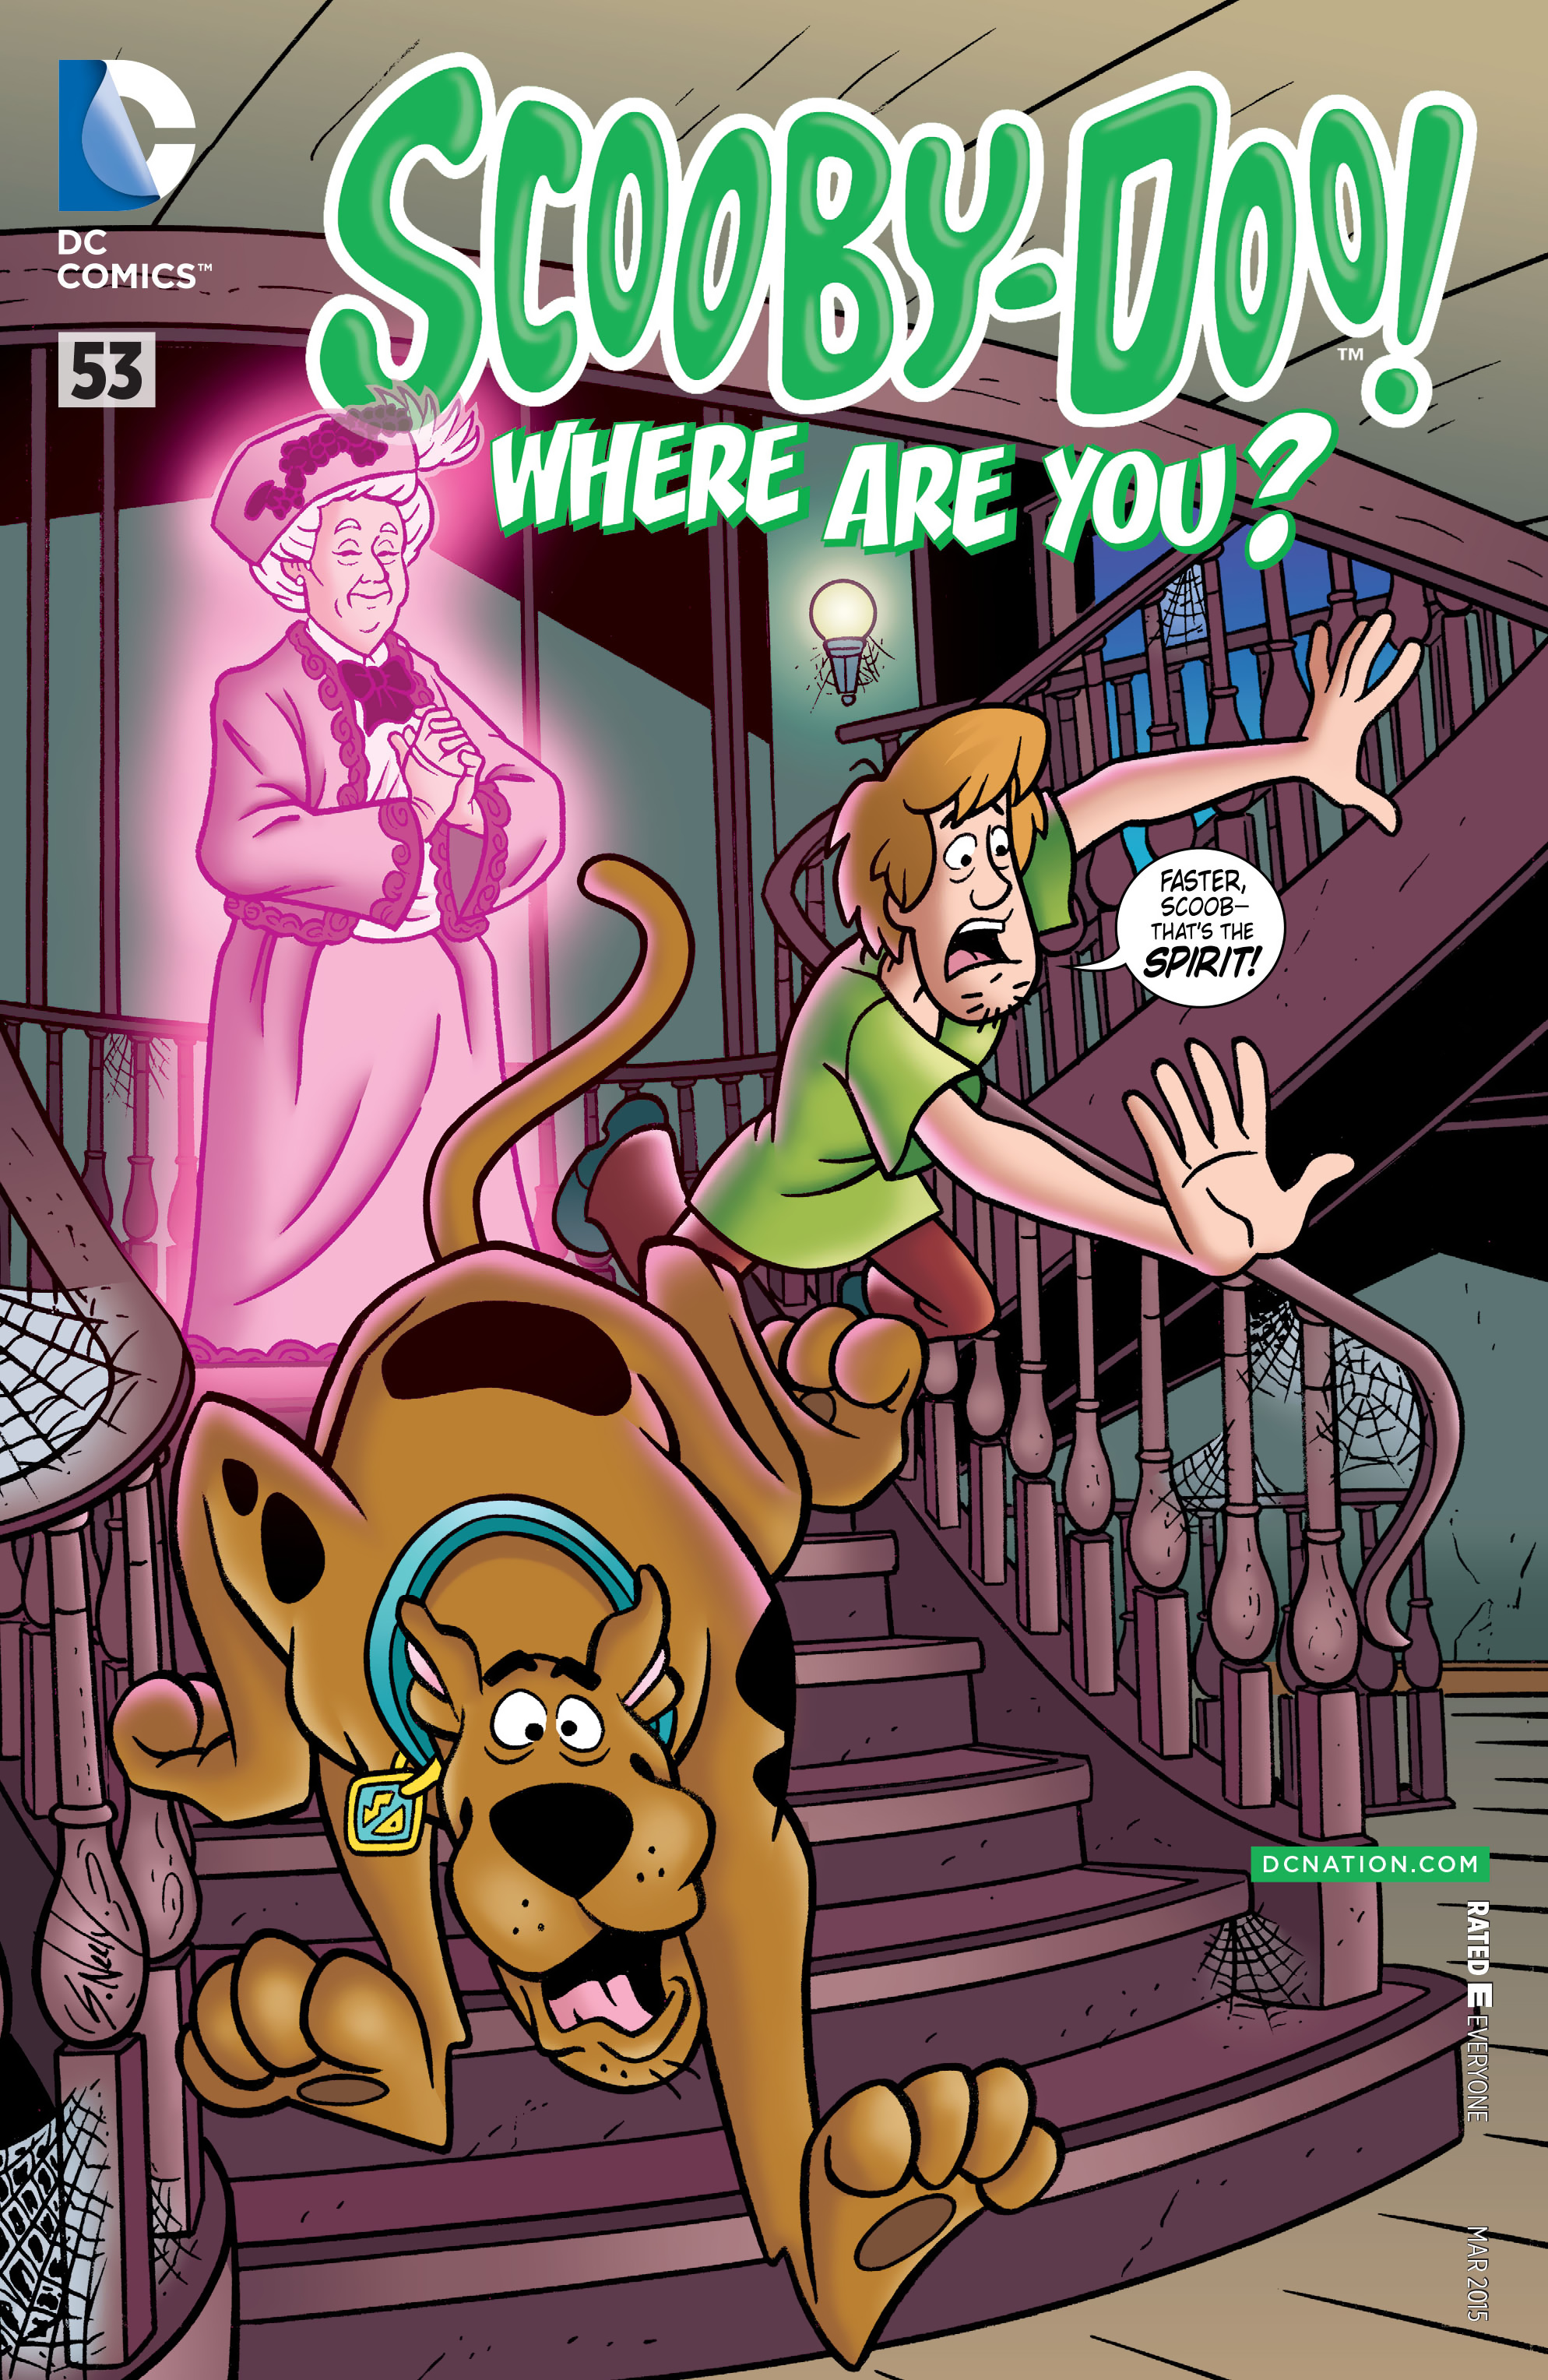 Read online Scooby-Doo: Where Are You? comic -  Issue #53 - 1